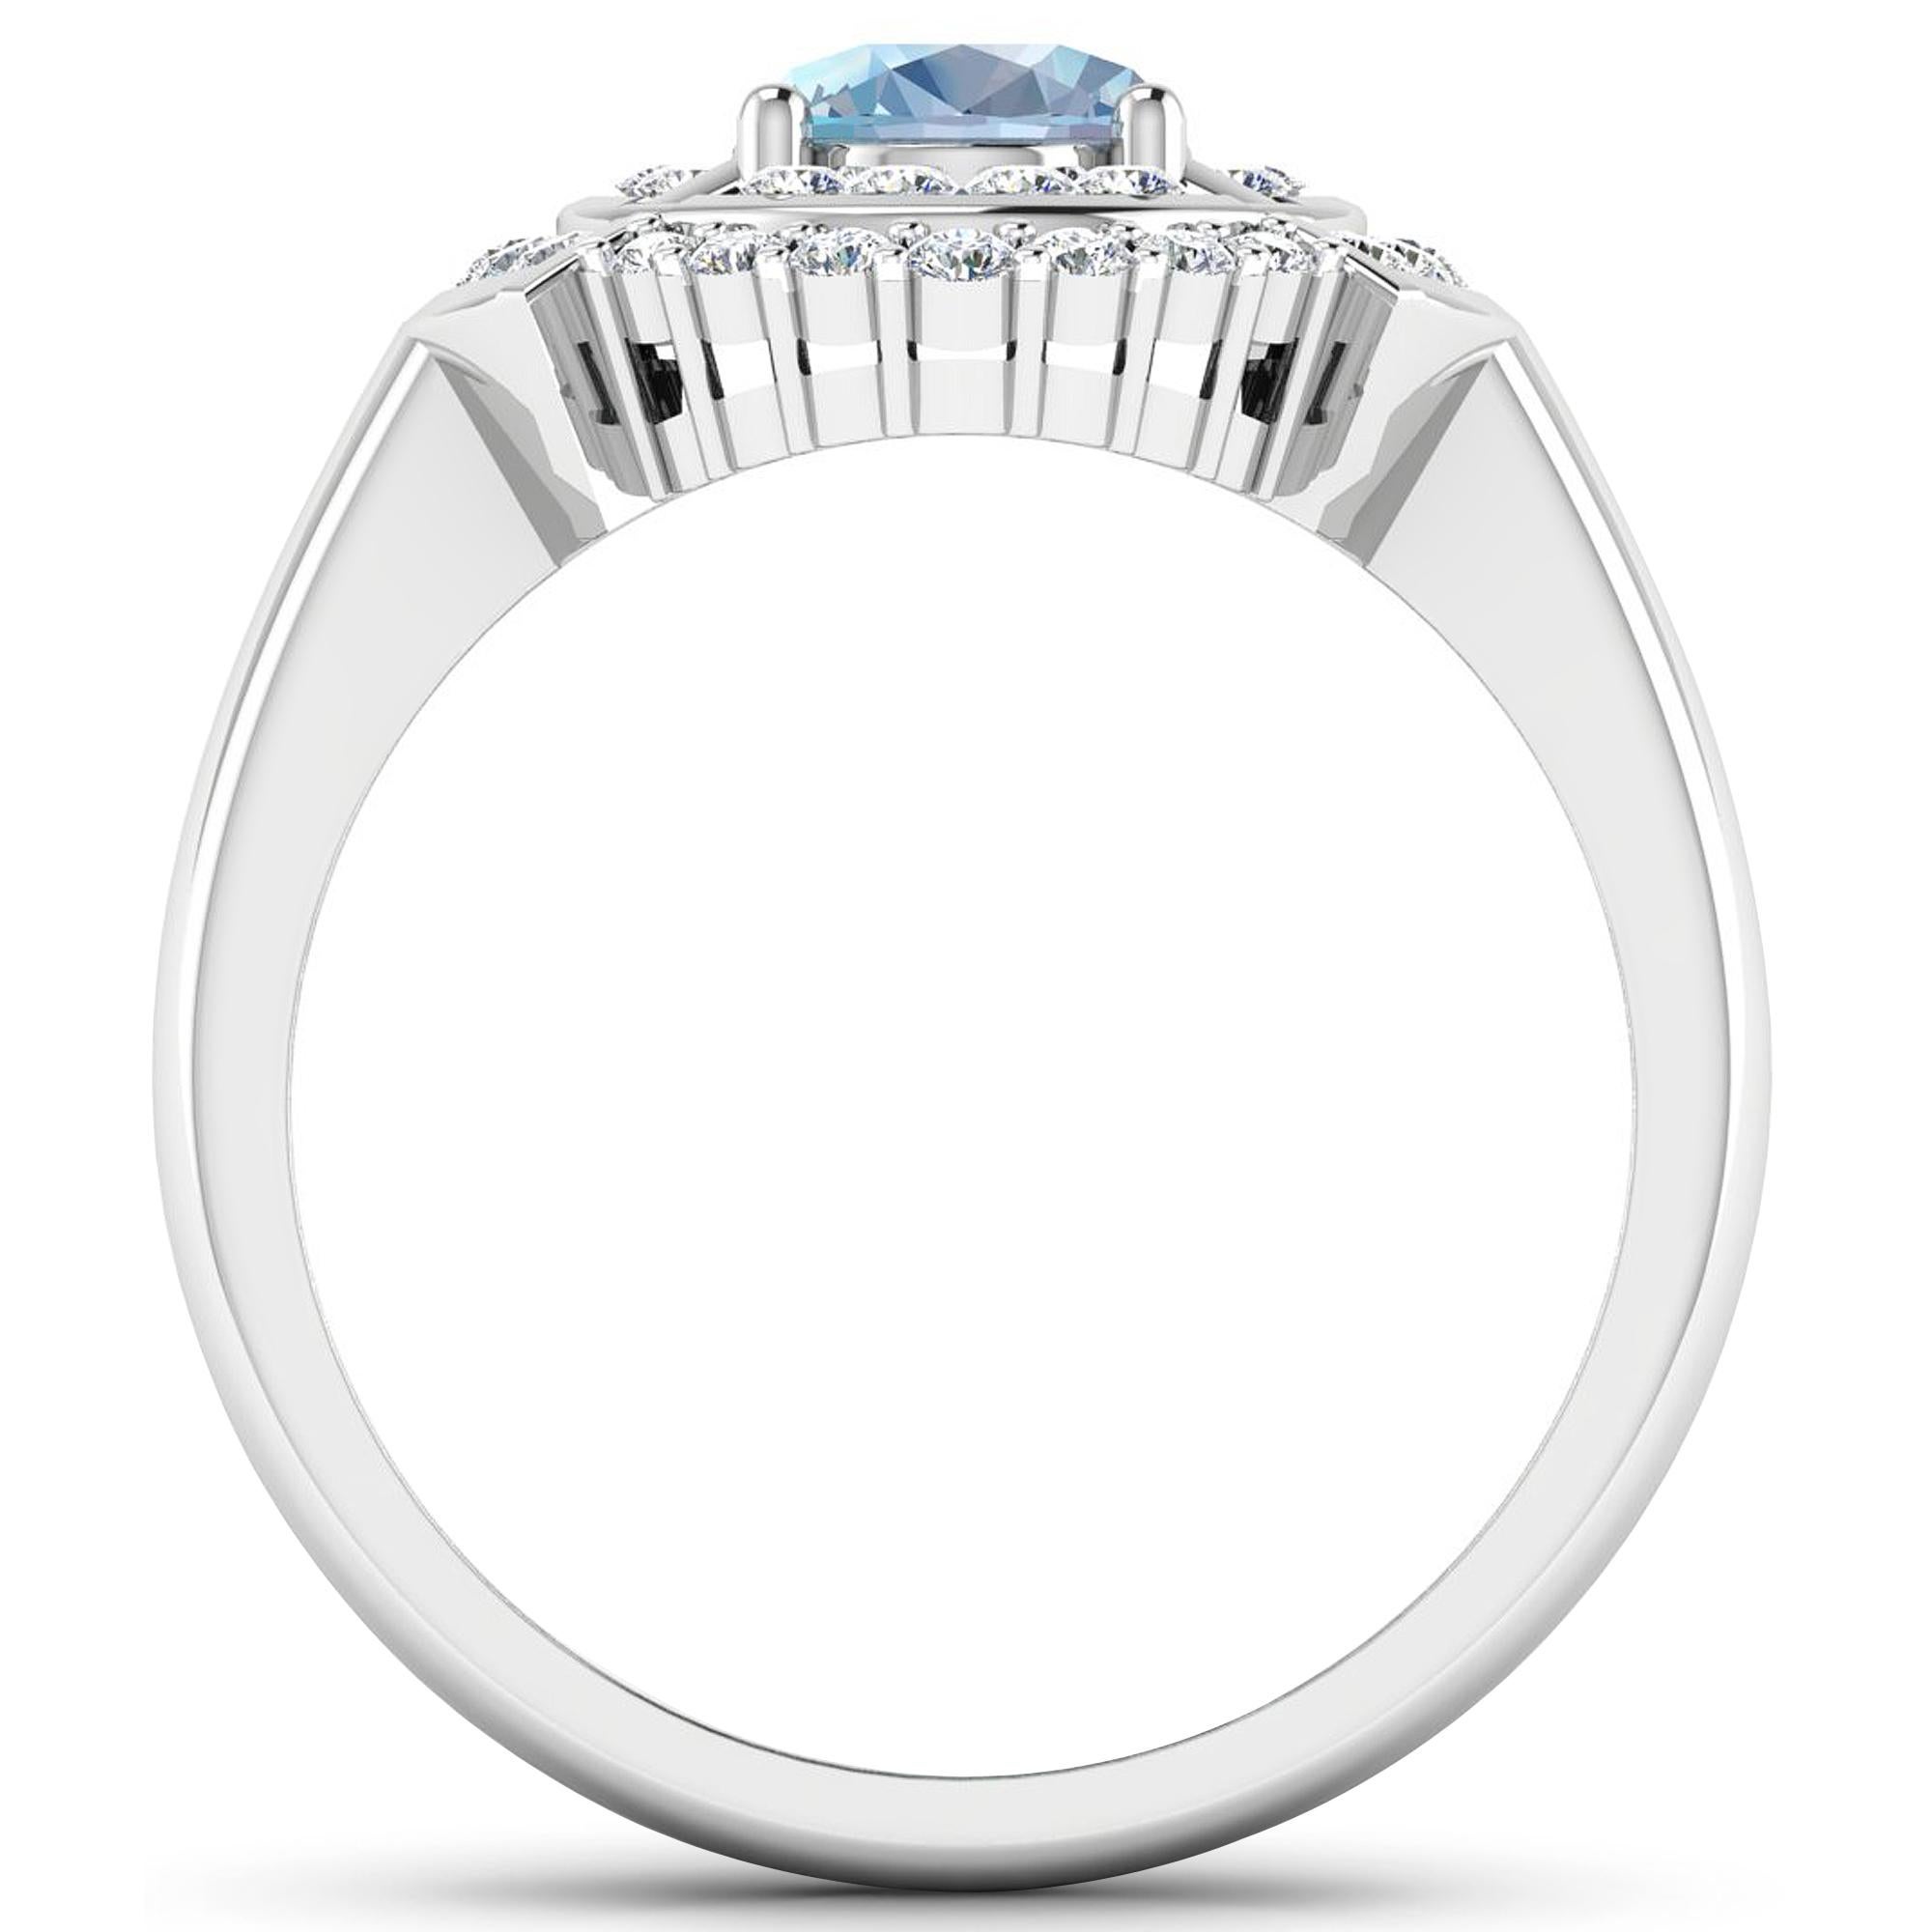 Aquamarine Gold Ring, 14Kt Gold Aquamarine & Diamond Engagement Ring, 1.52ctw.

Flaunt yourself with this 14K White Gold Aquamarine & White Diamond Engagement Ring. The setting is inlaid with 38 accented full-cut White Diamond round stones for a